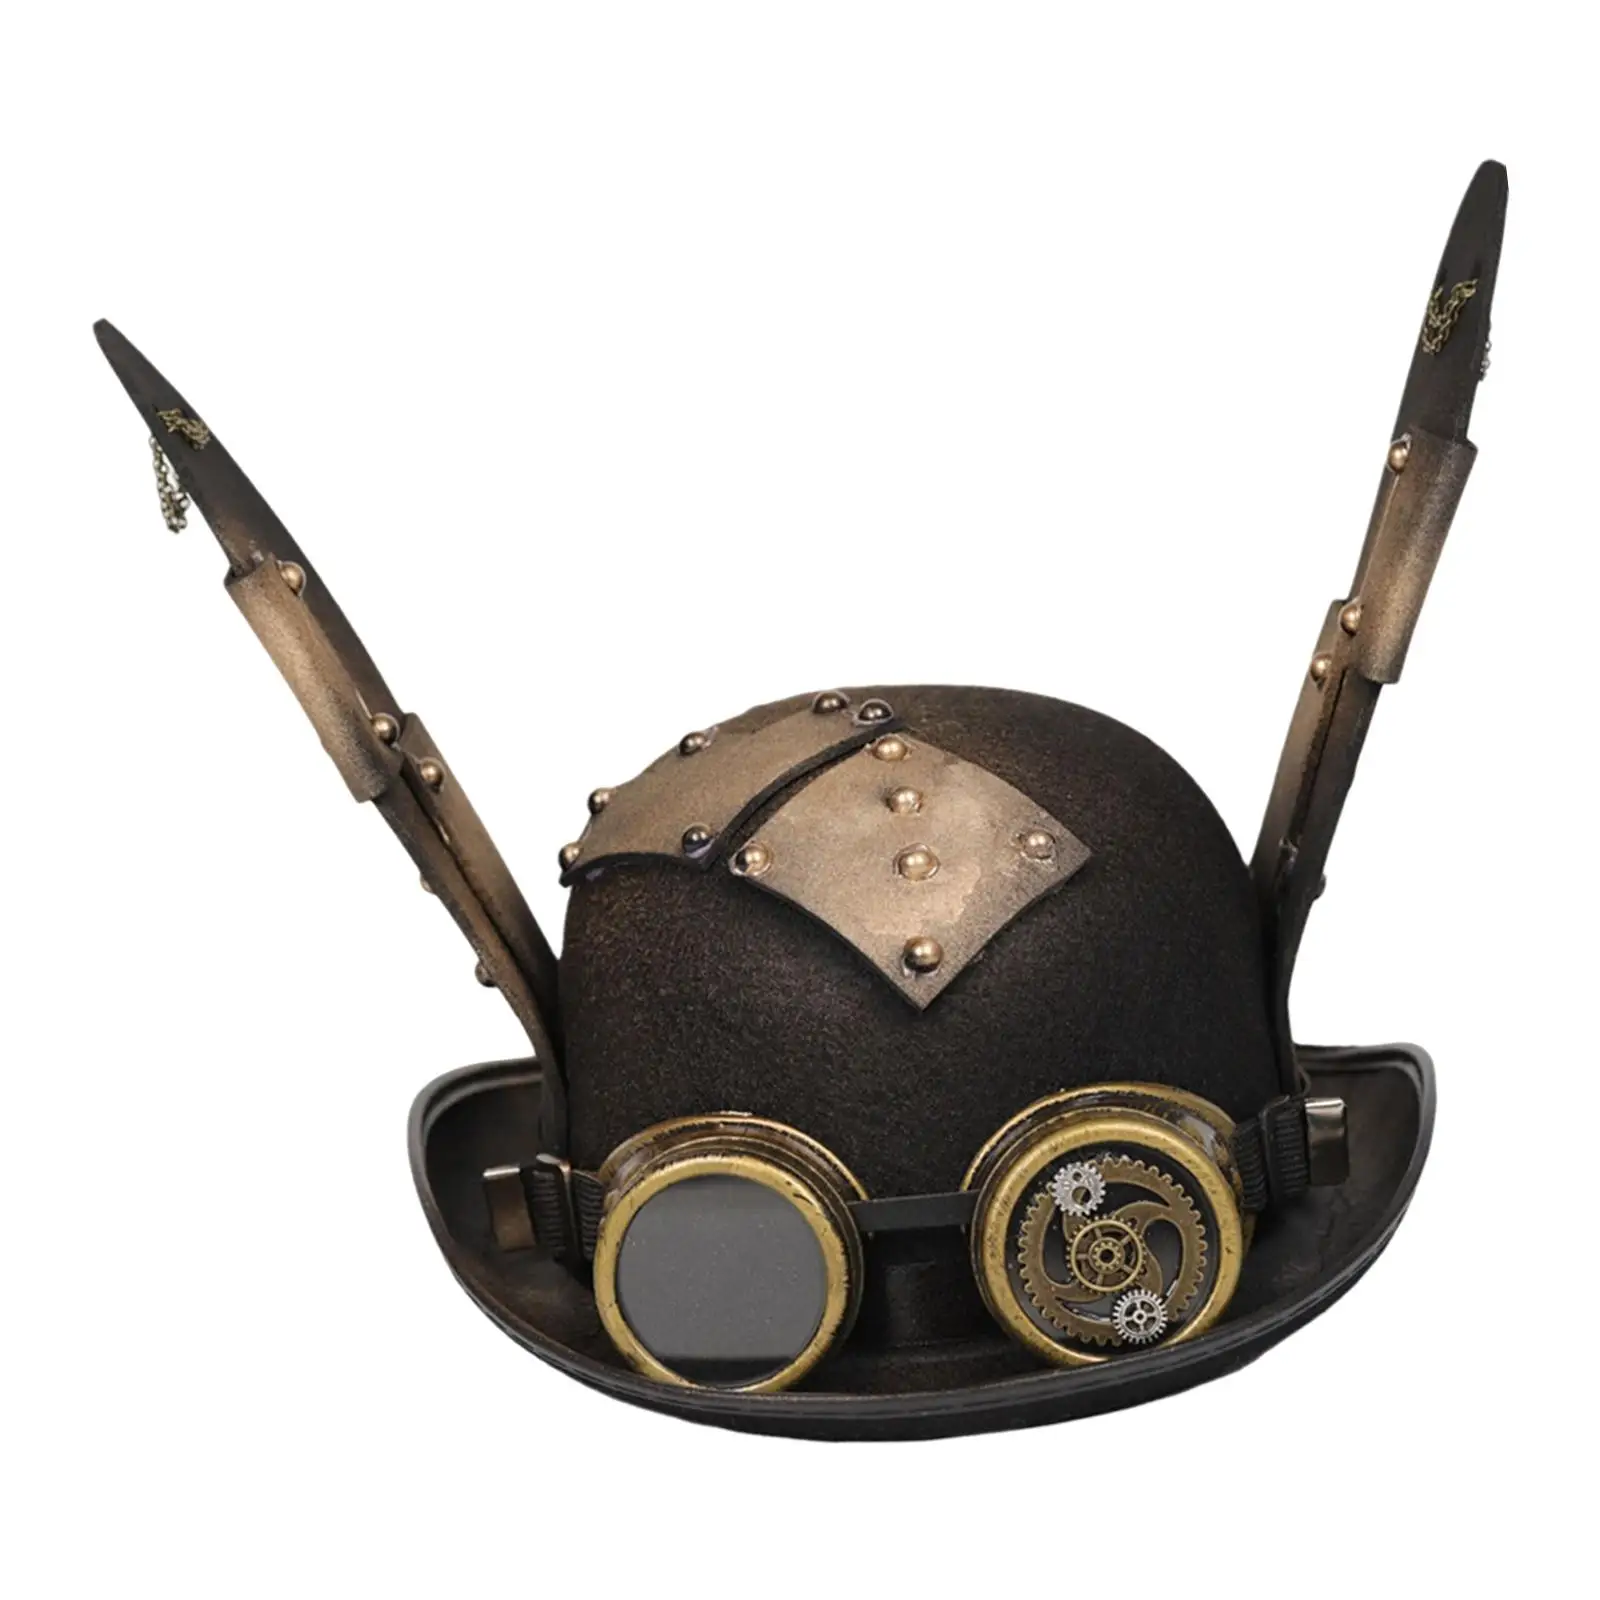 Halloween Steampunk Hat with Goggles Black Top Hat Masquerade Costume Party Detachable Goggle Retro Steampunk Goggles Glasses